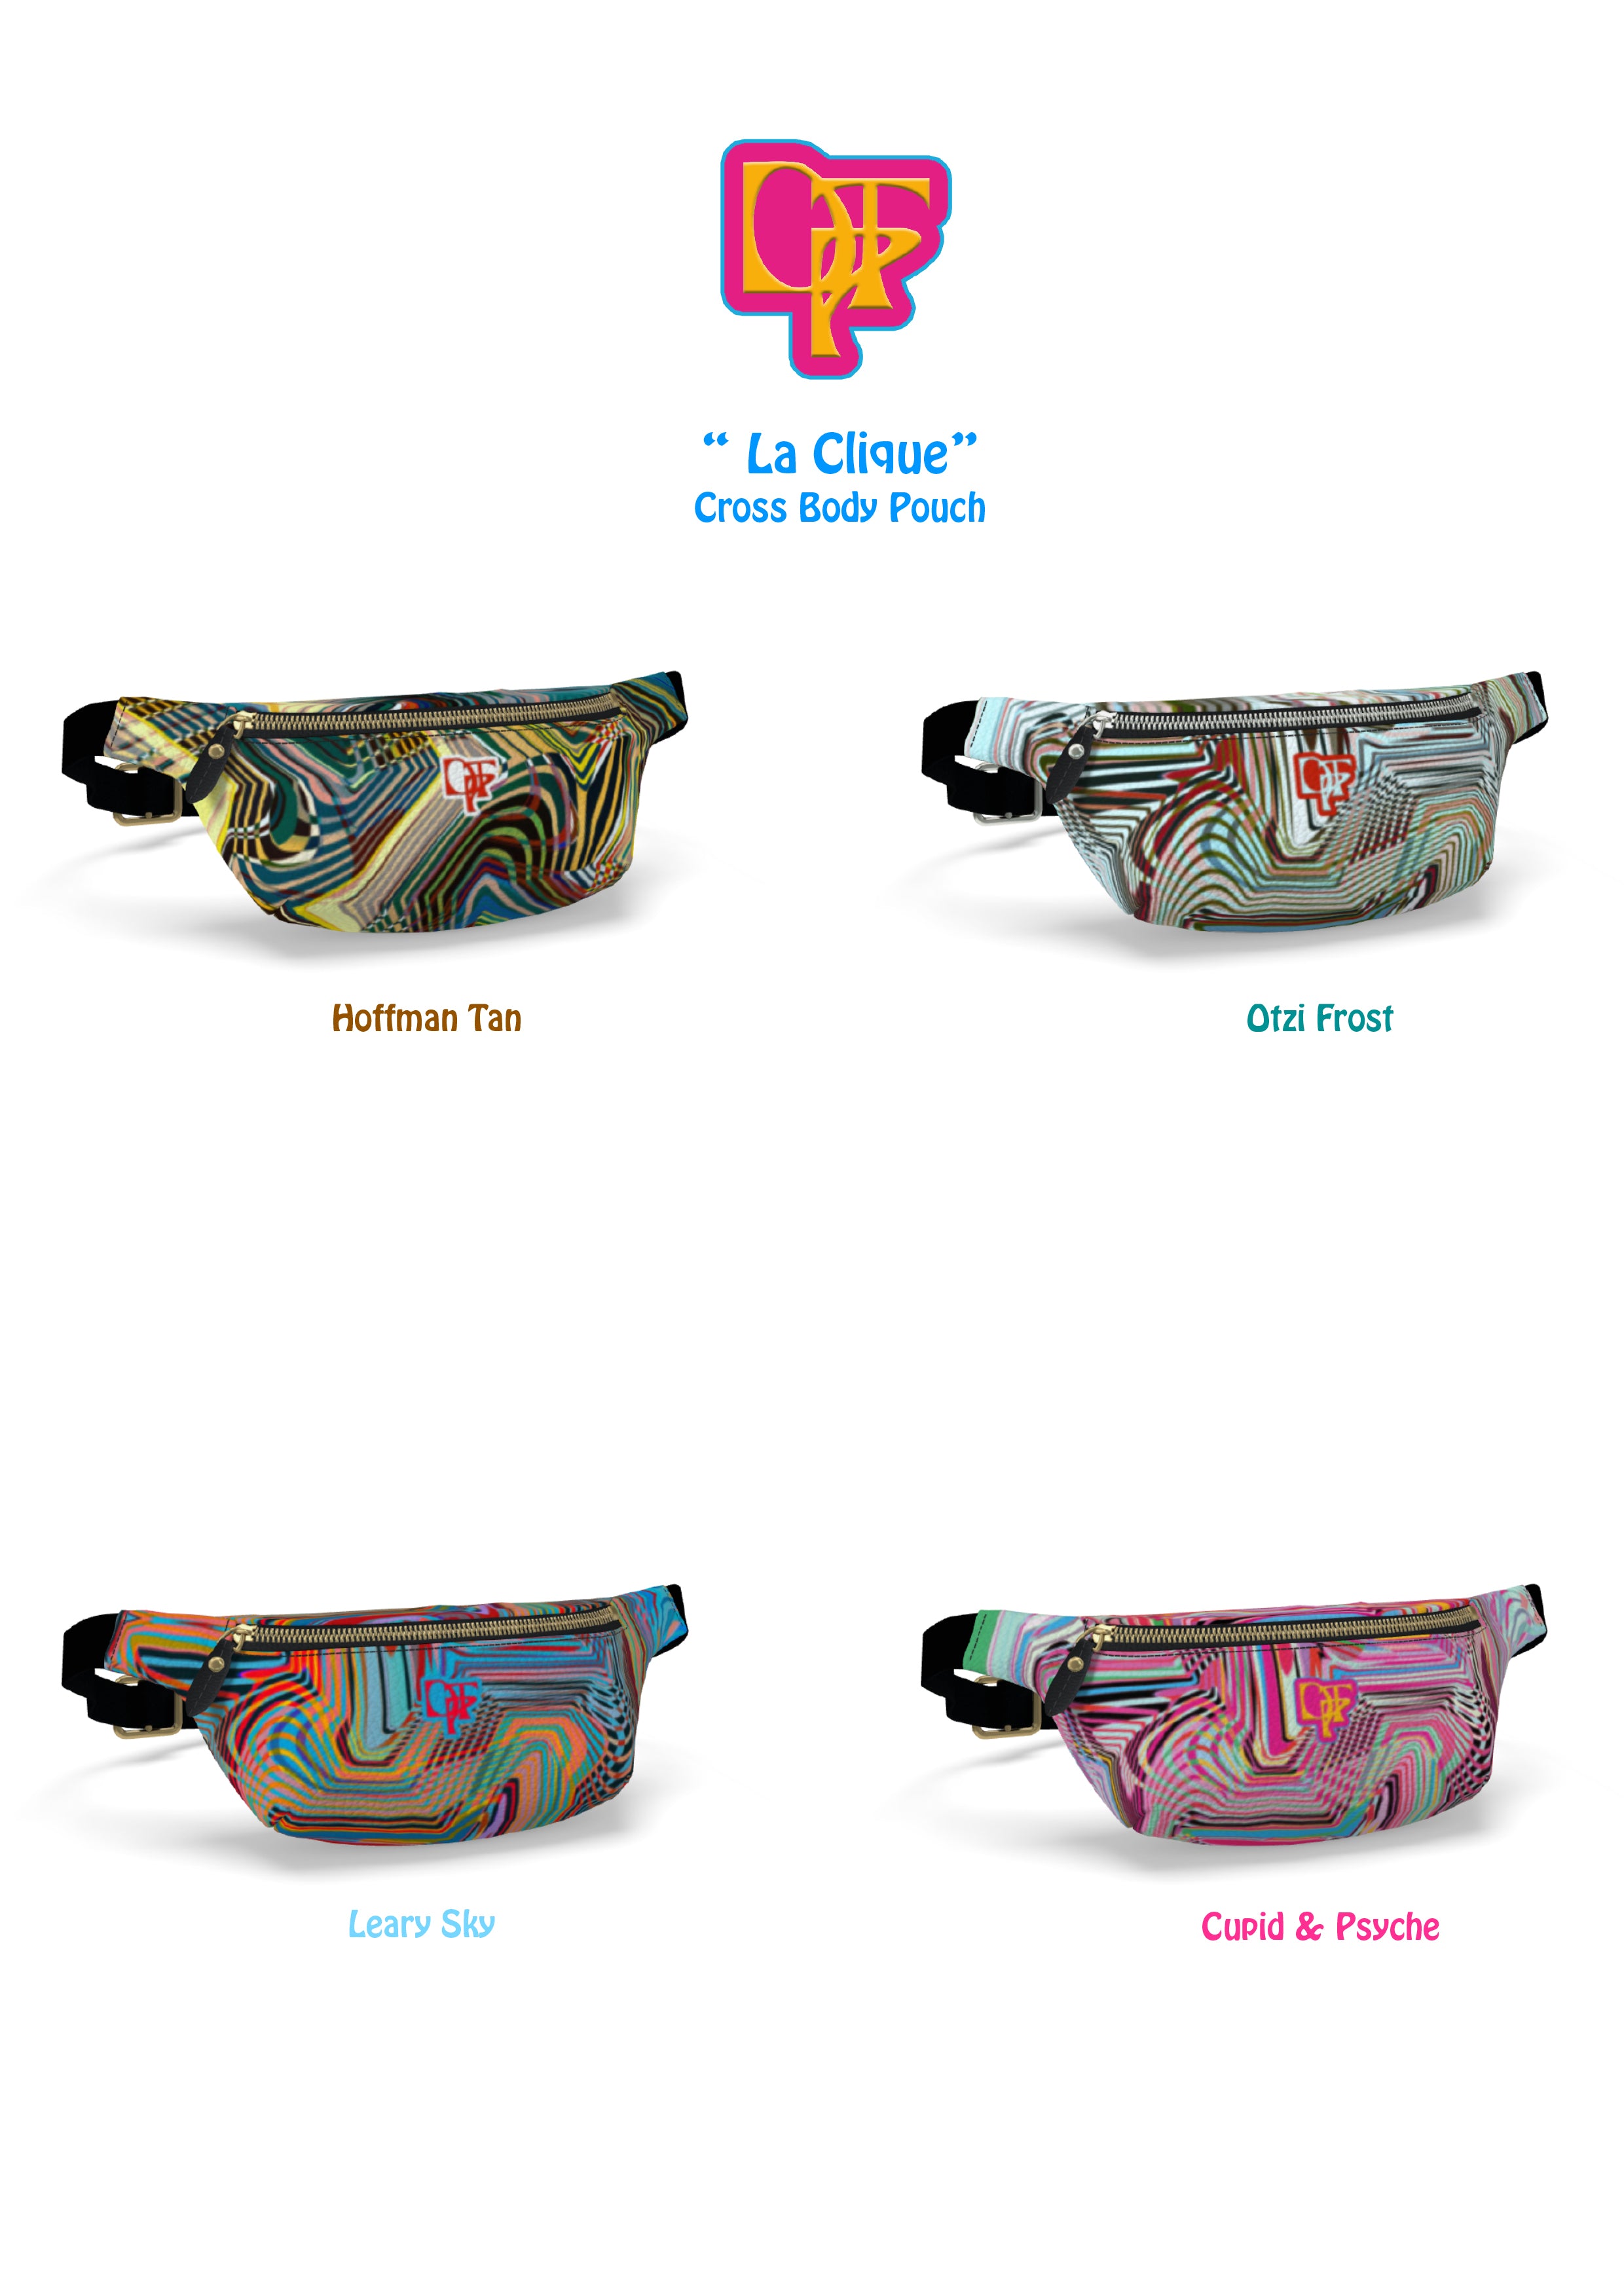 “La Clique" Leather cross body Pouch In Cupid & Psyche